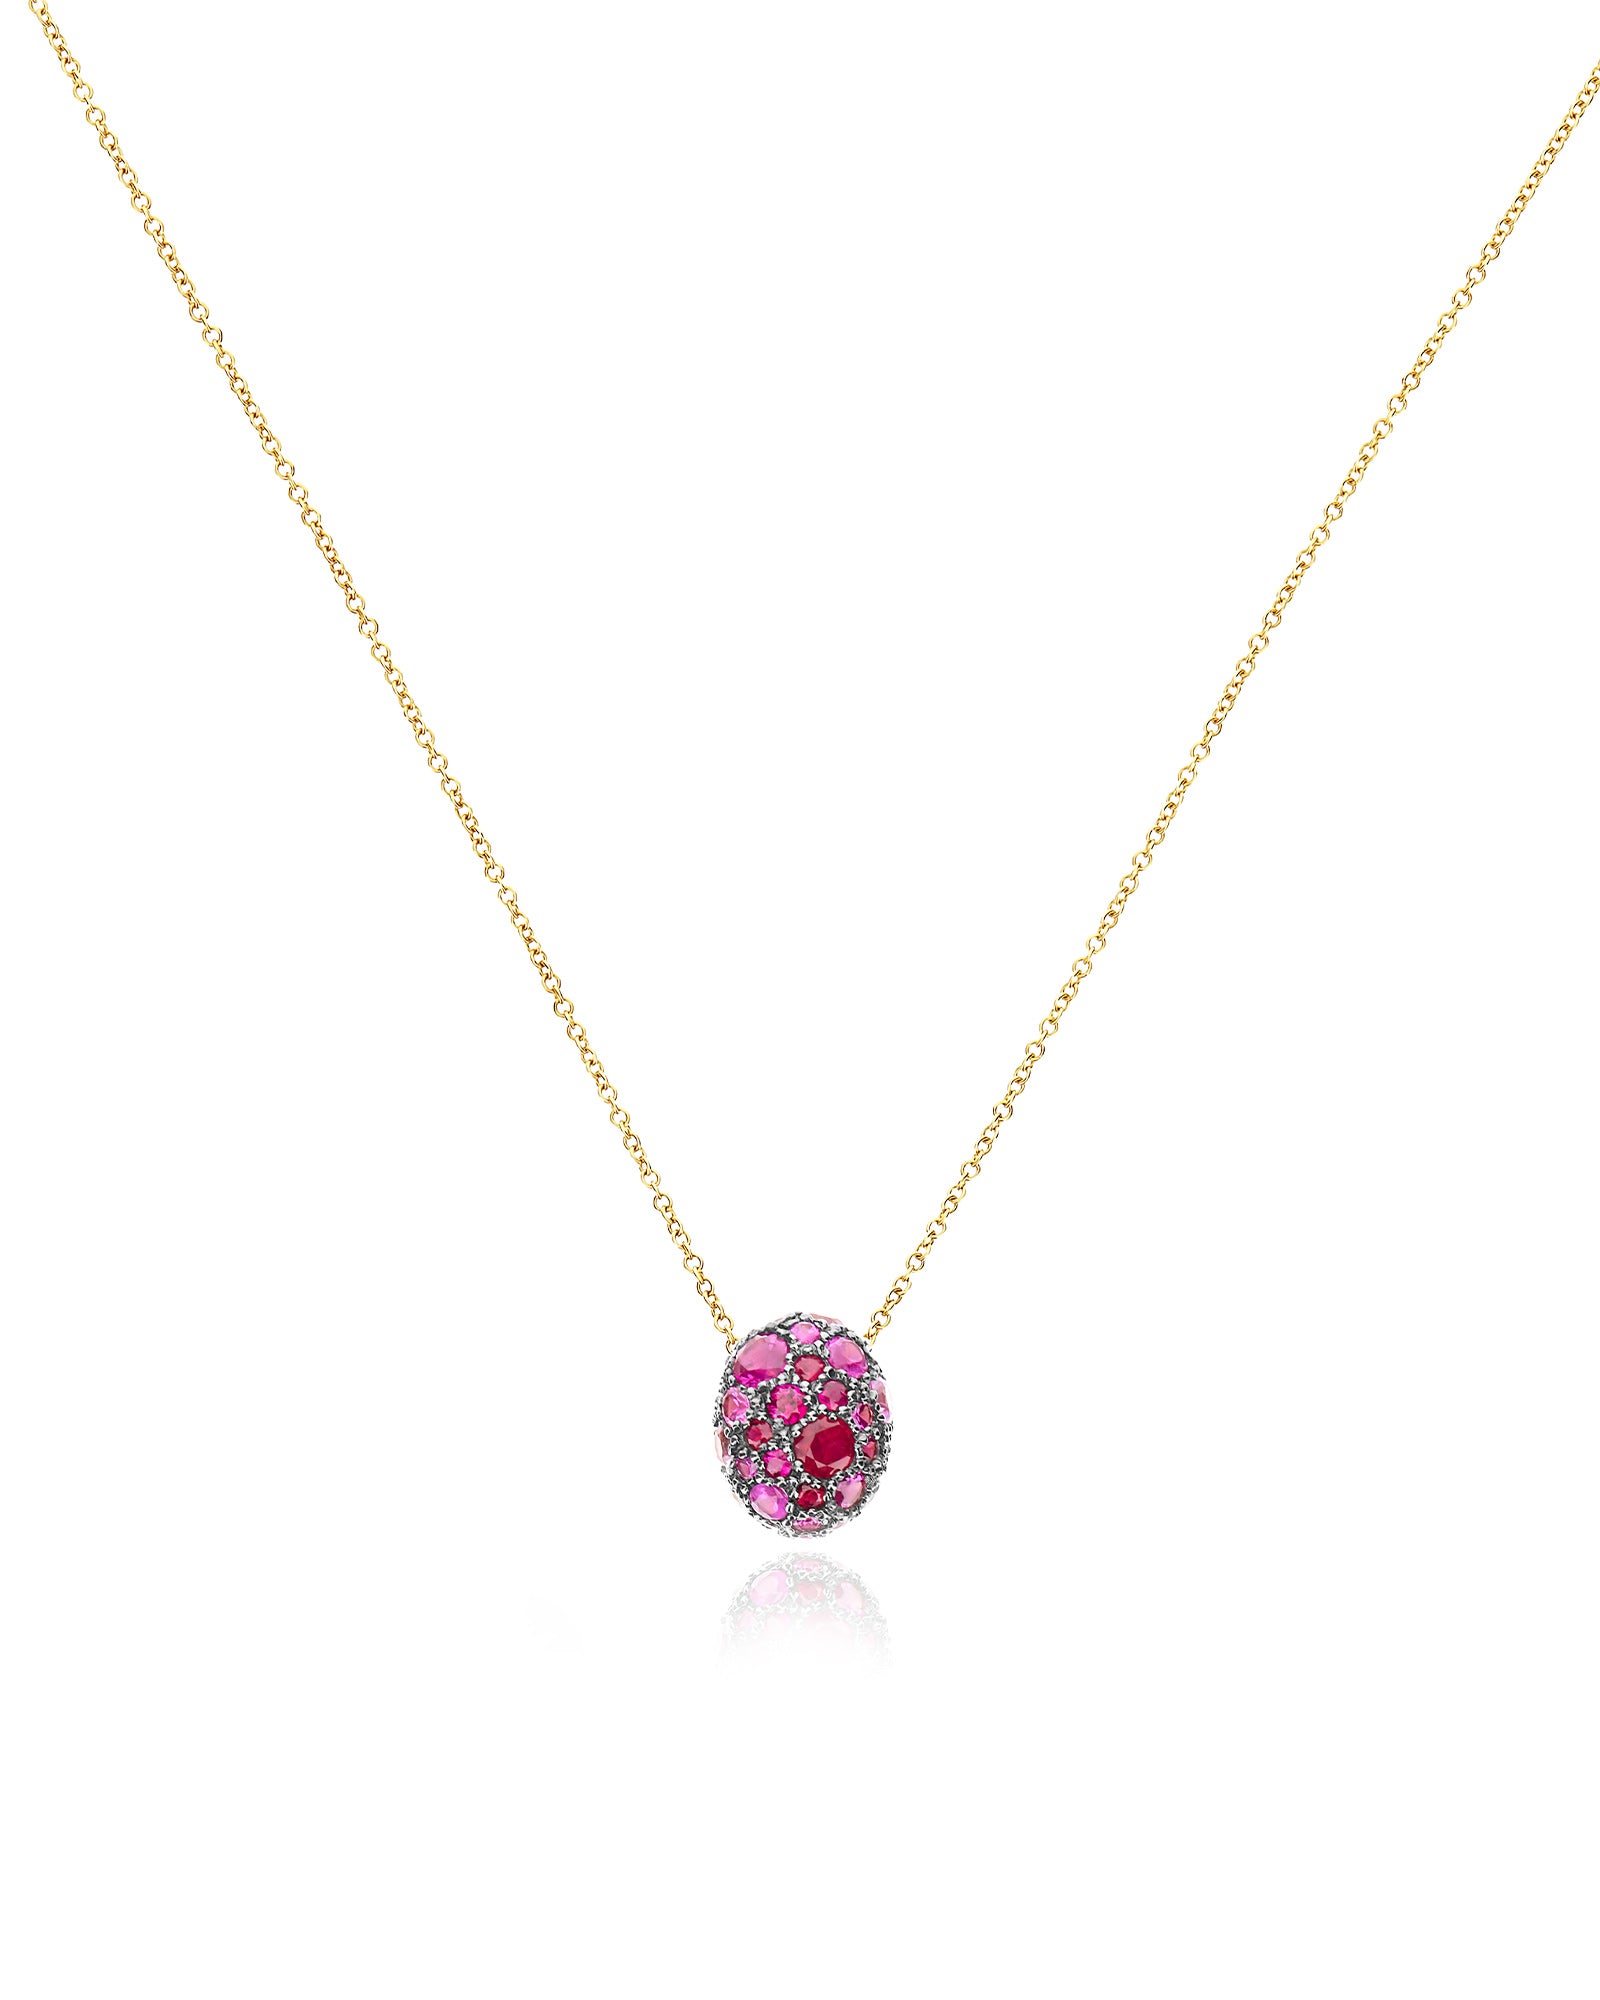 "Reverse" Gold, Pink Sapphires, Rubies, White Australian Opal and Diamonds Double-face Necklace